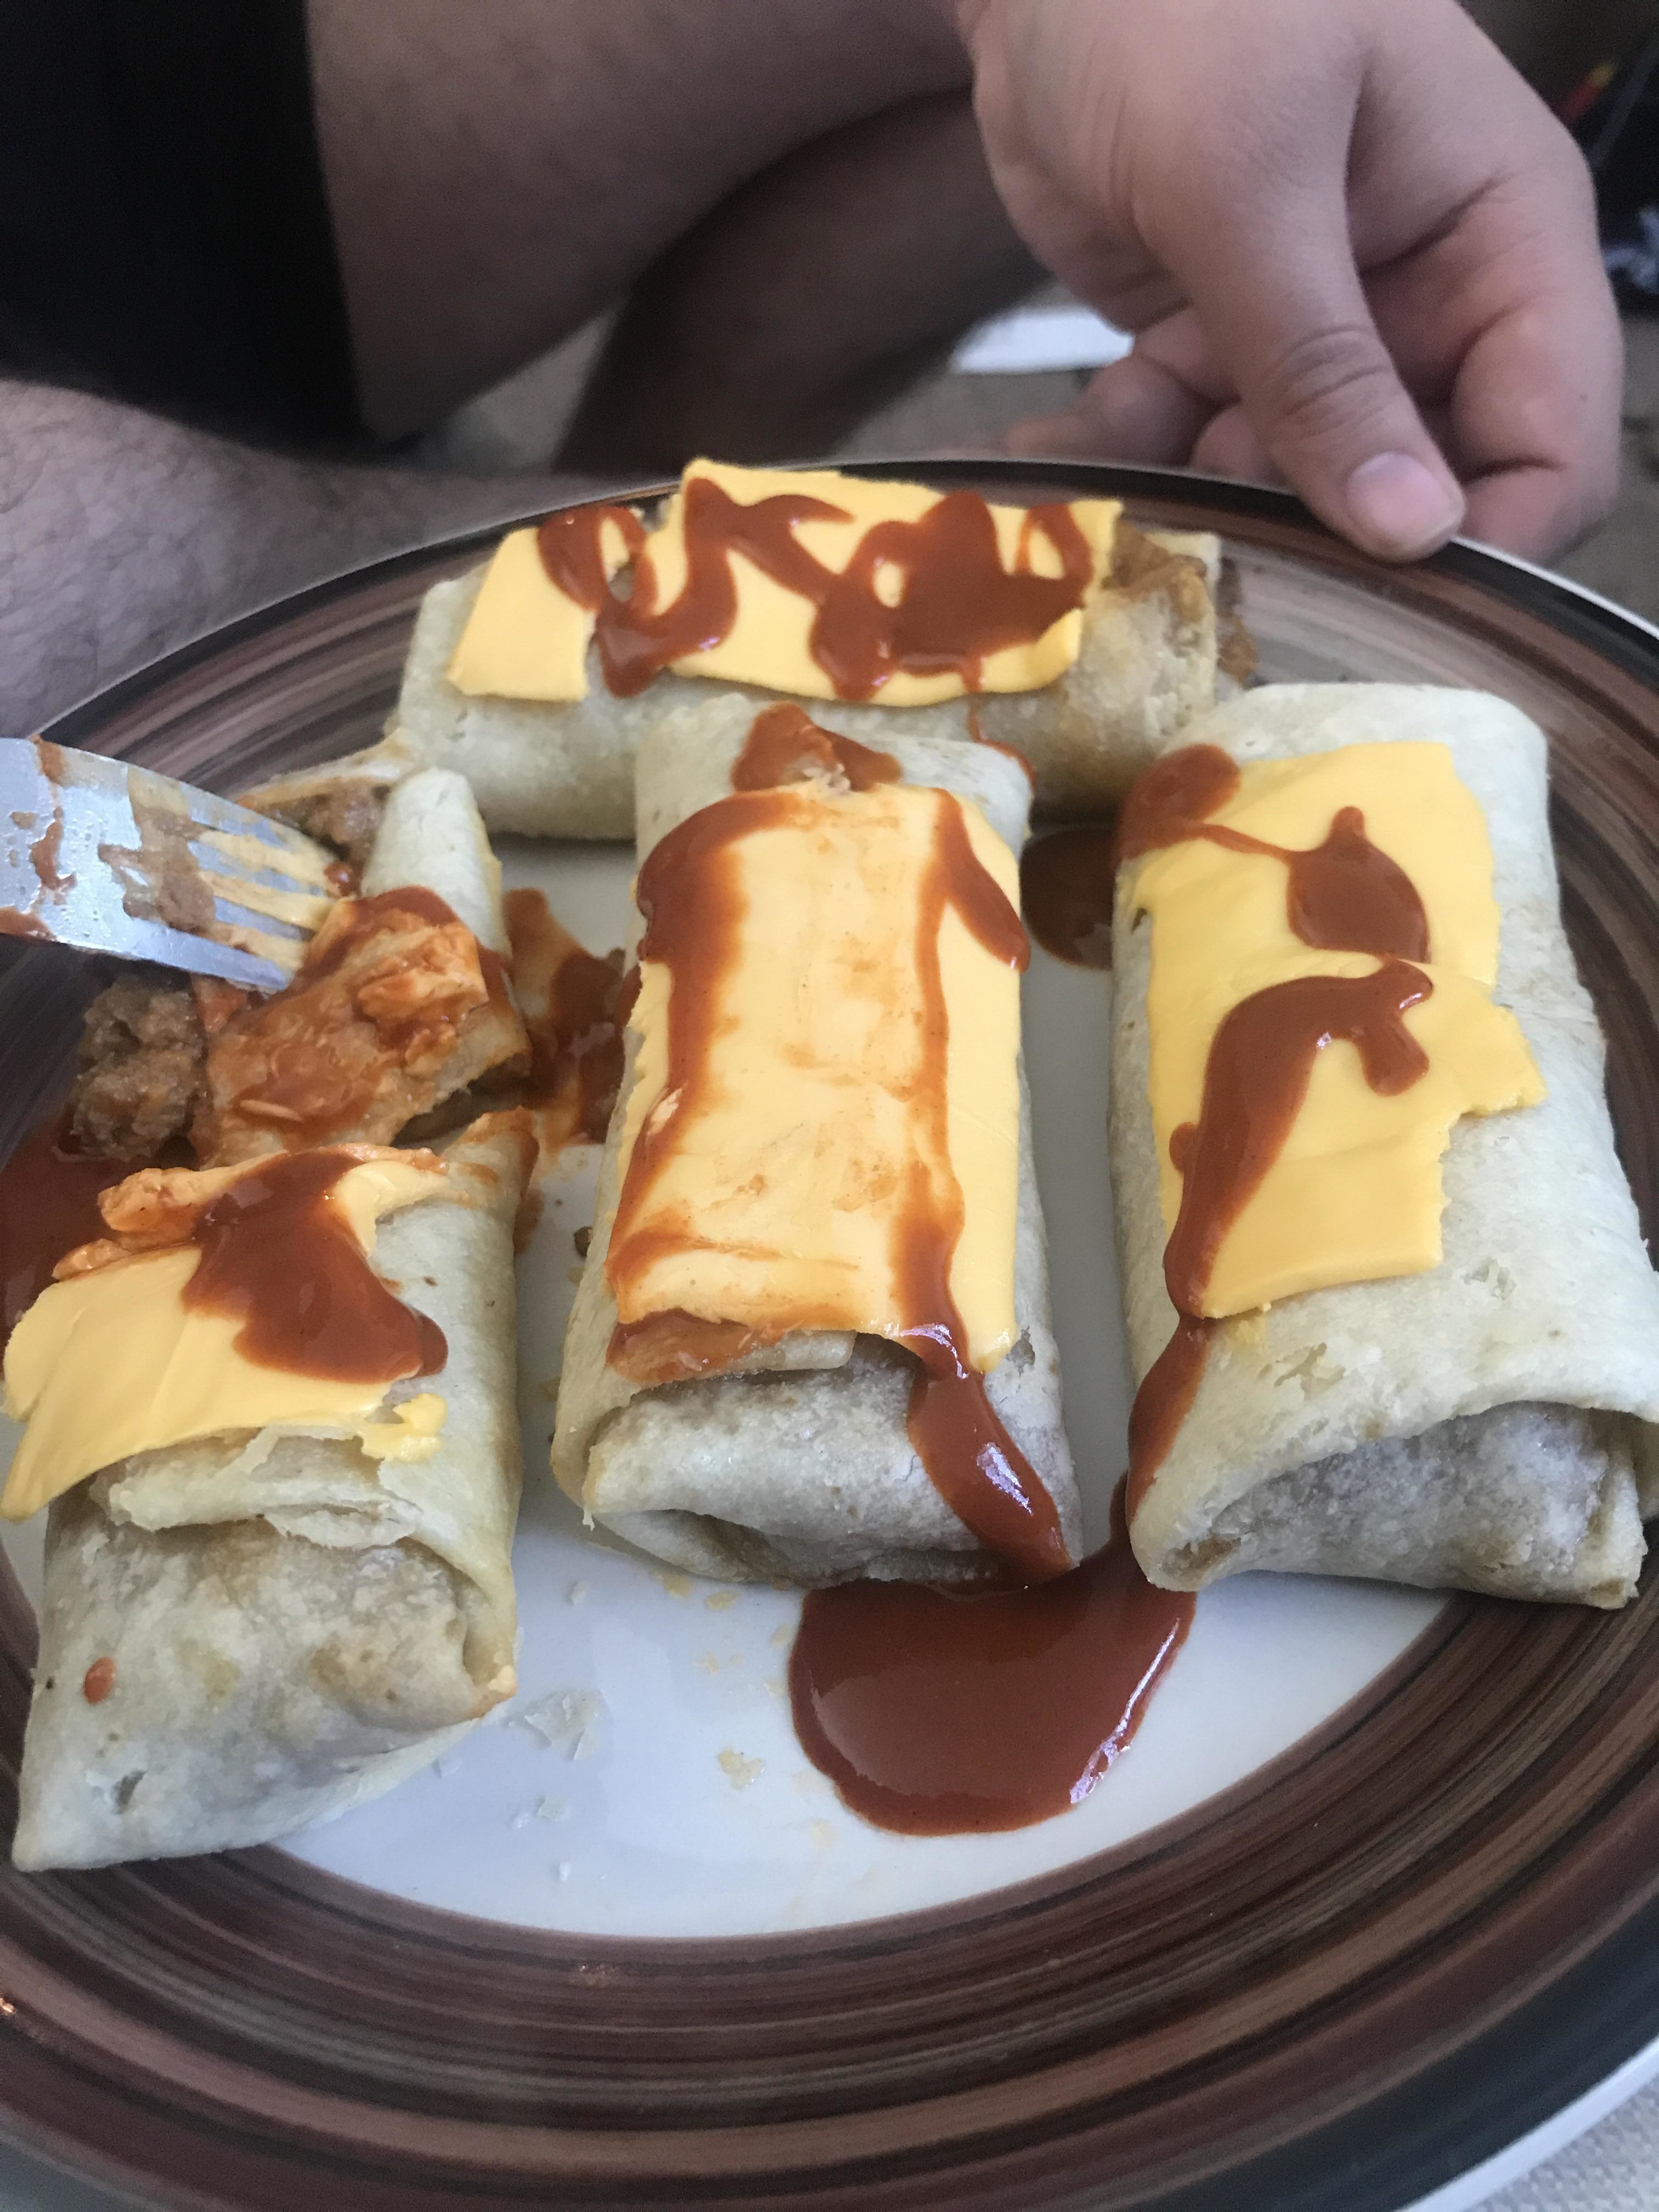 frozen burritos topped with american sliced cheese and hot sauce